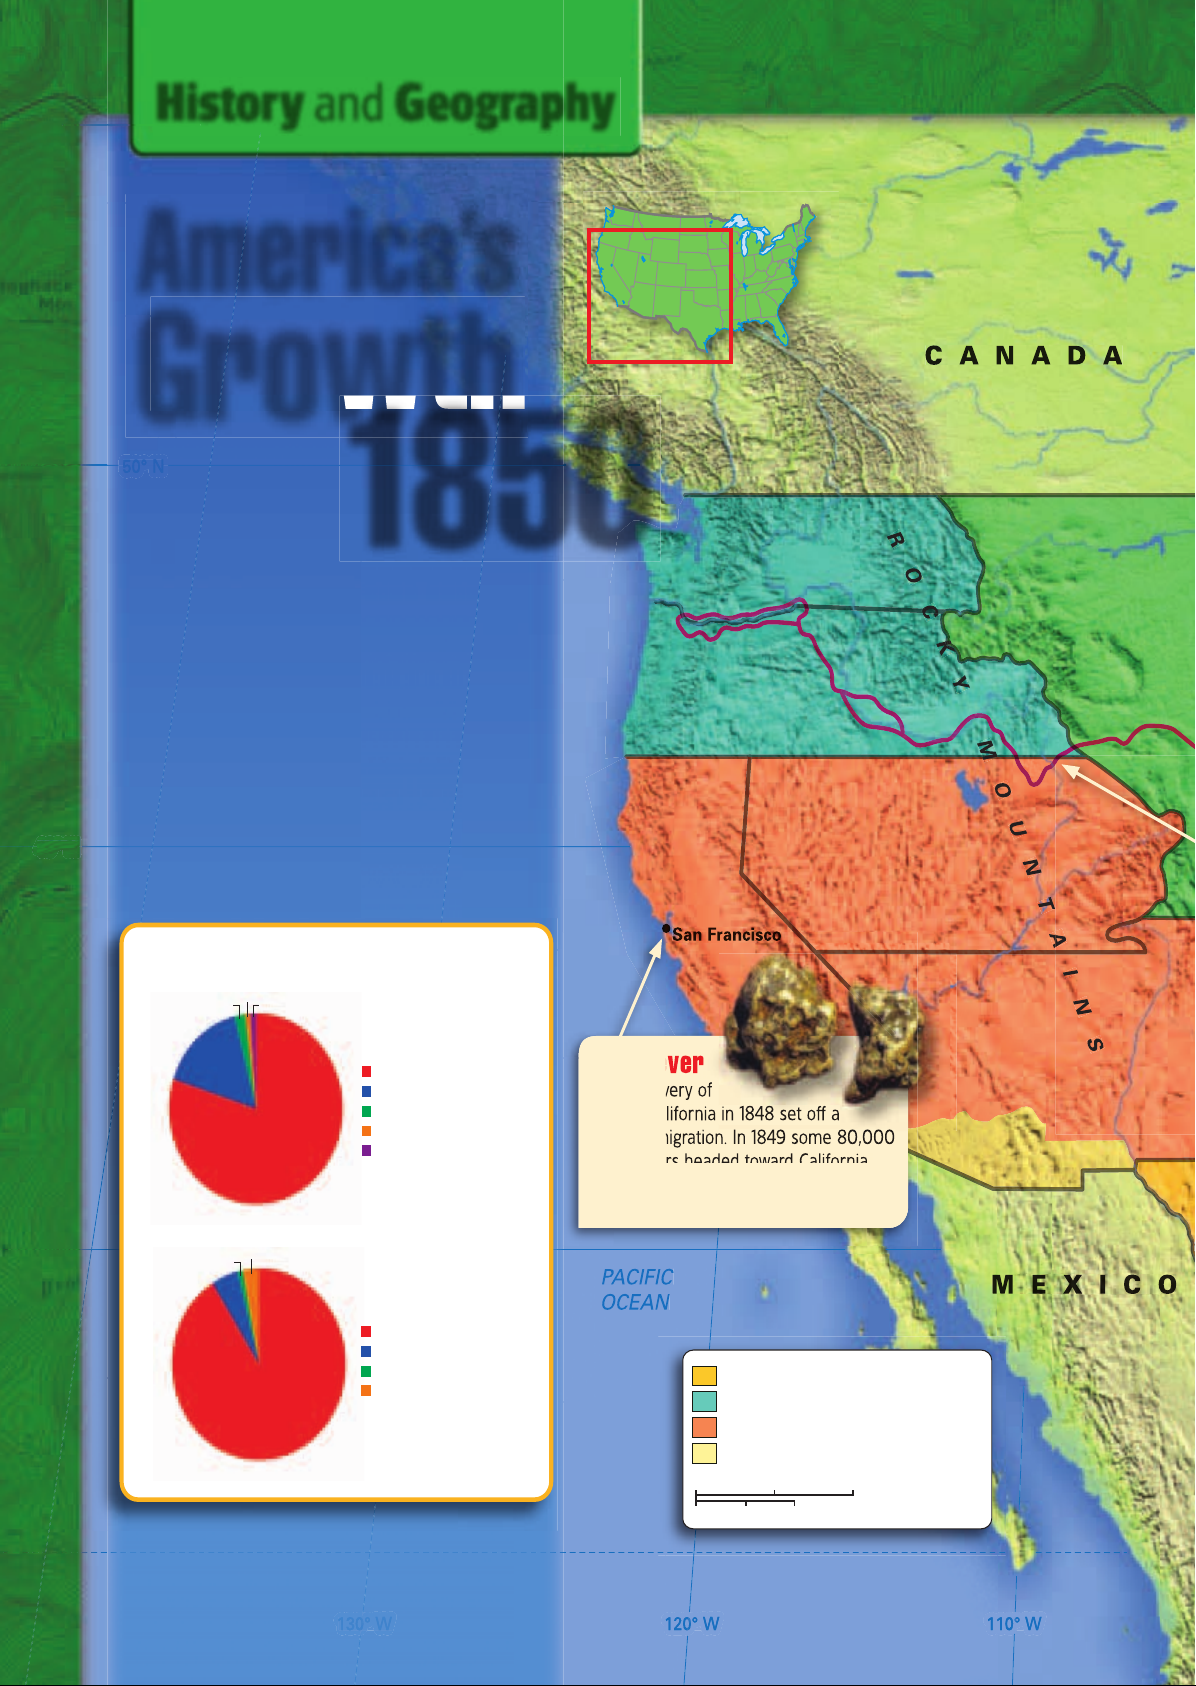 US_History_Textbook_8th_Grade_Chapter_10_Expanding_West_Part_2_Tn1P96Z Image-4